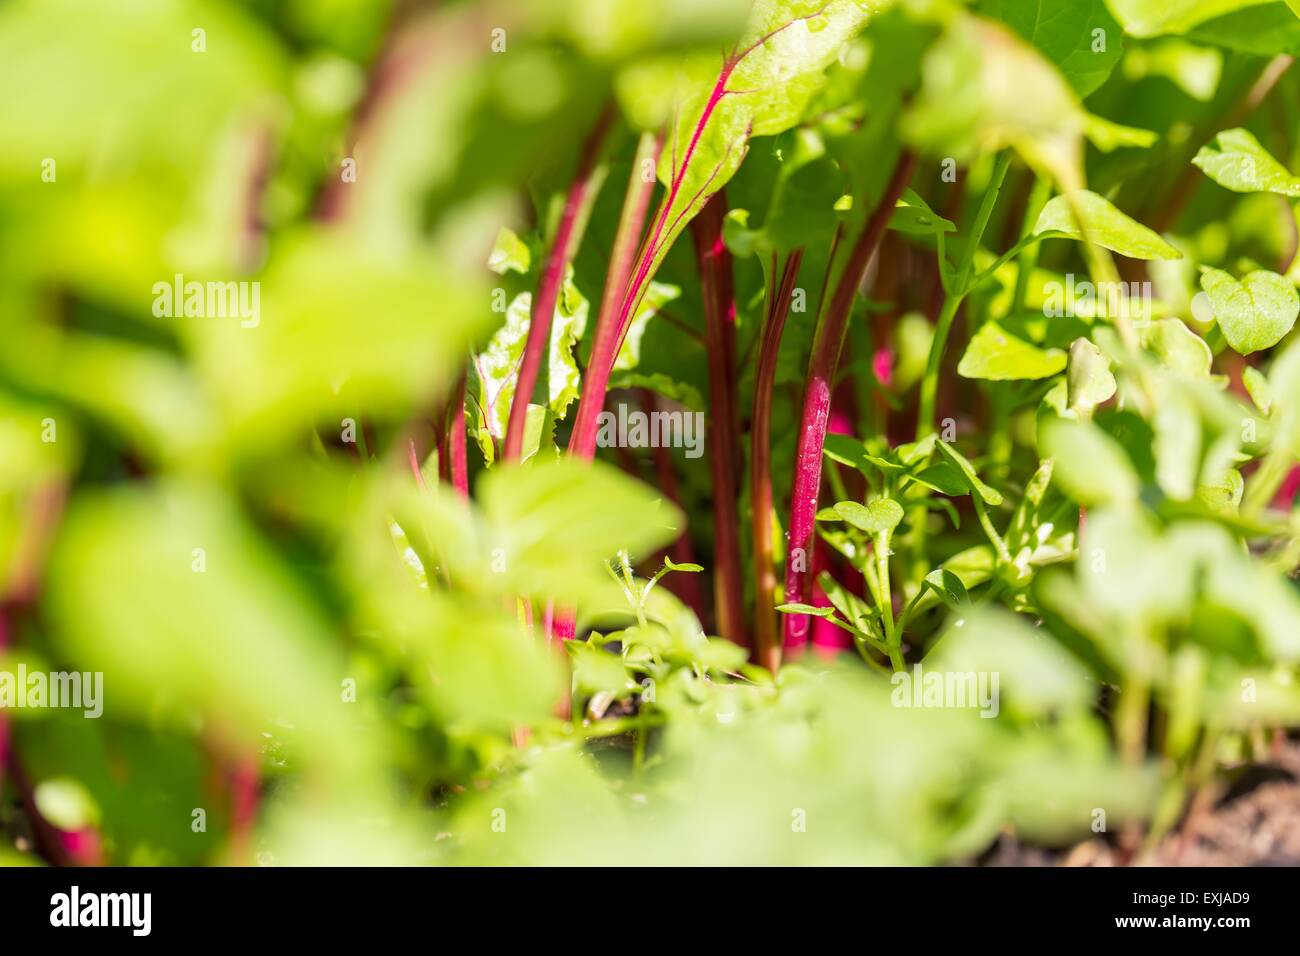 Green young leaves of beetroot growing in garden. Beet leaves in close up Stock Photo